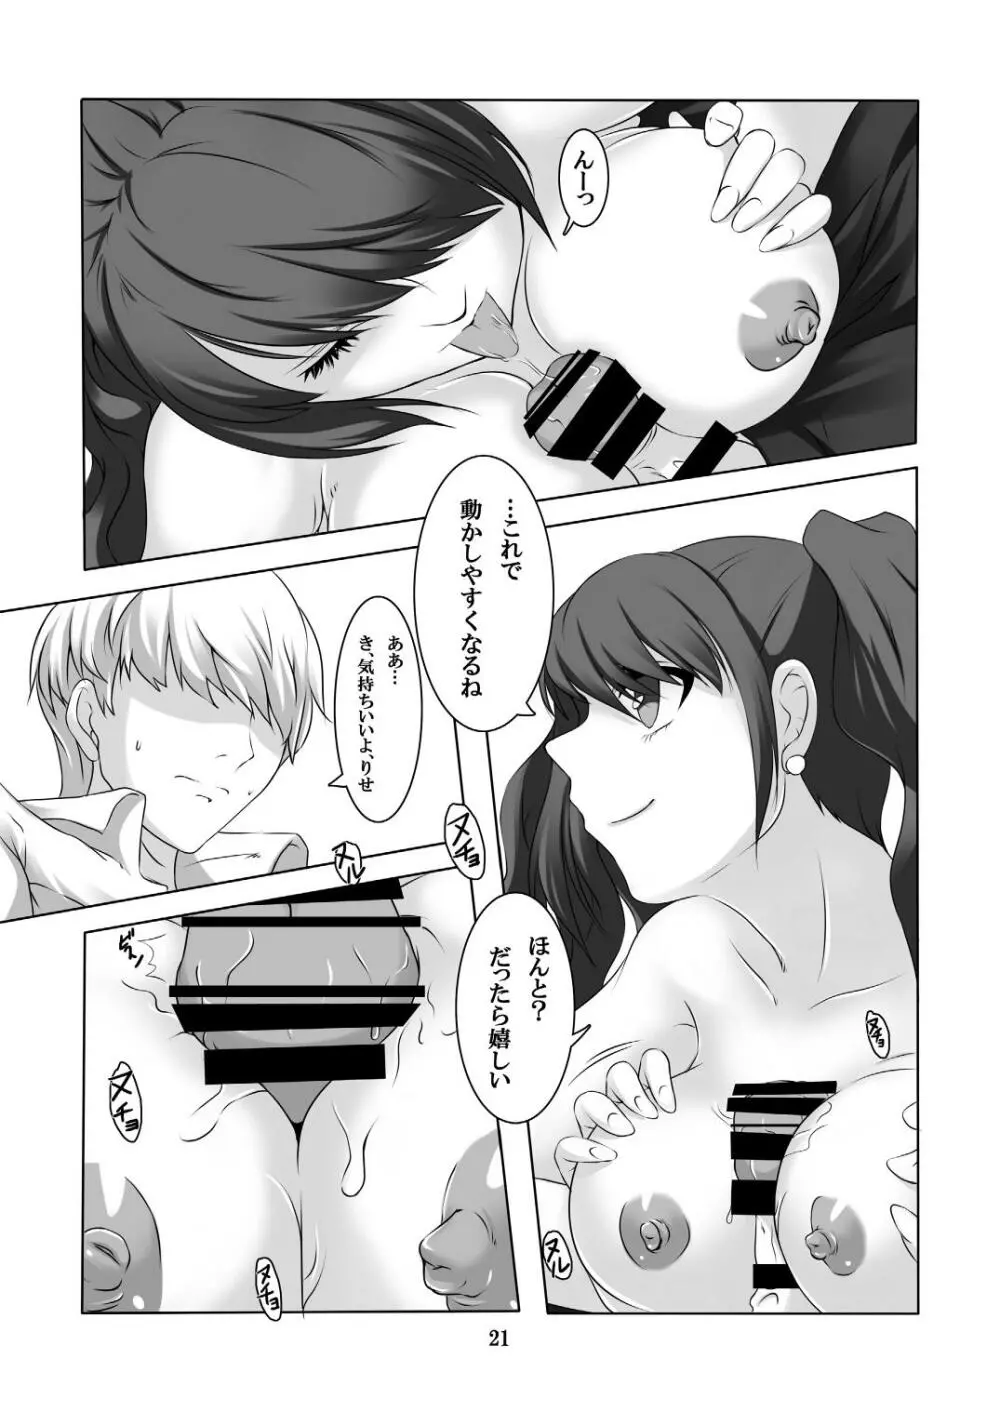 Persona 4: The Doujin #3 #4 Page.22